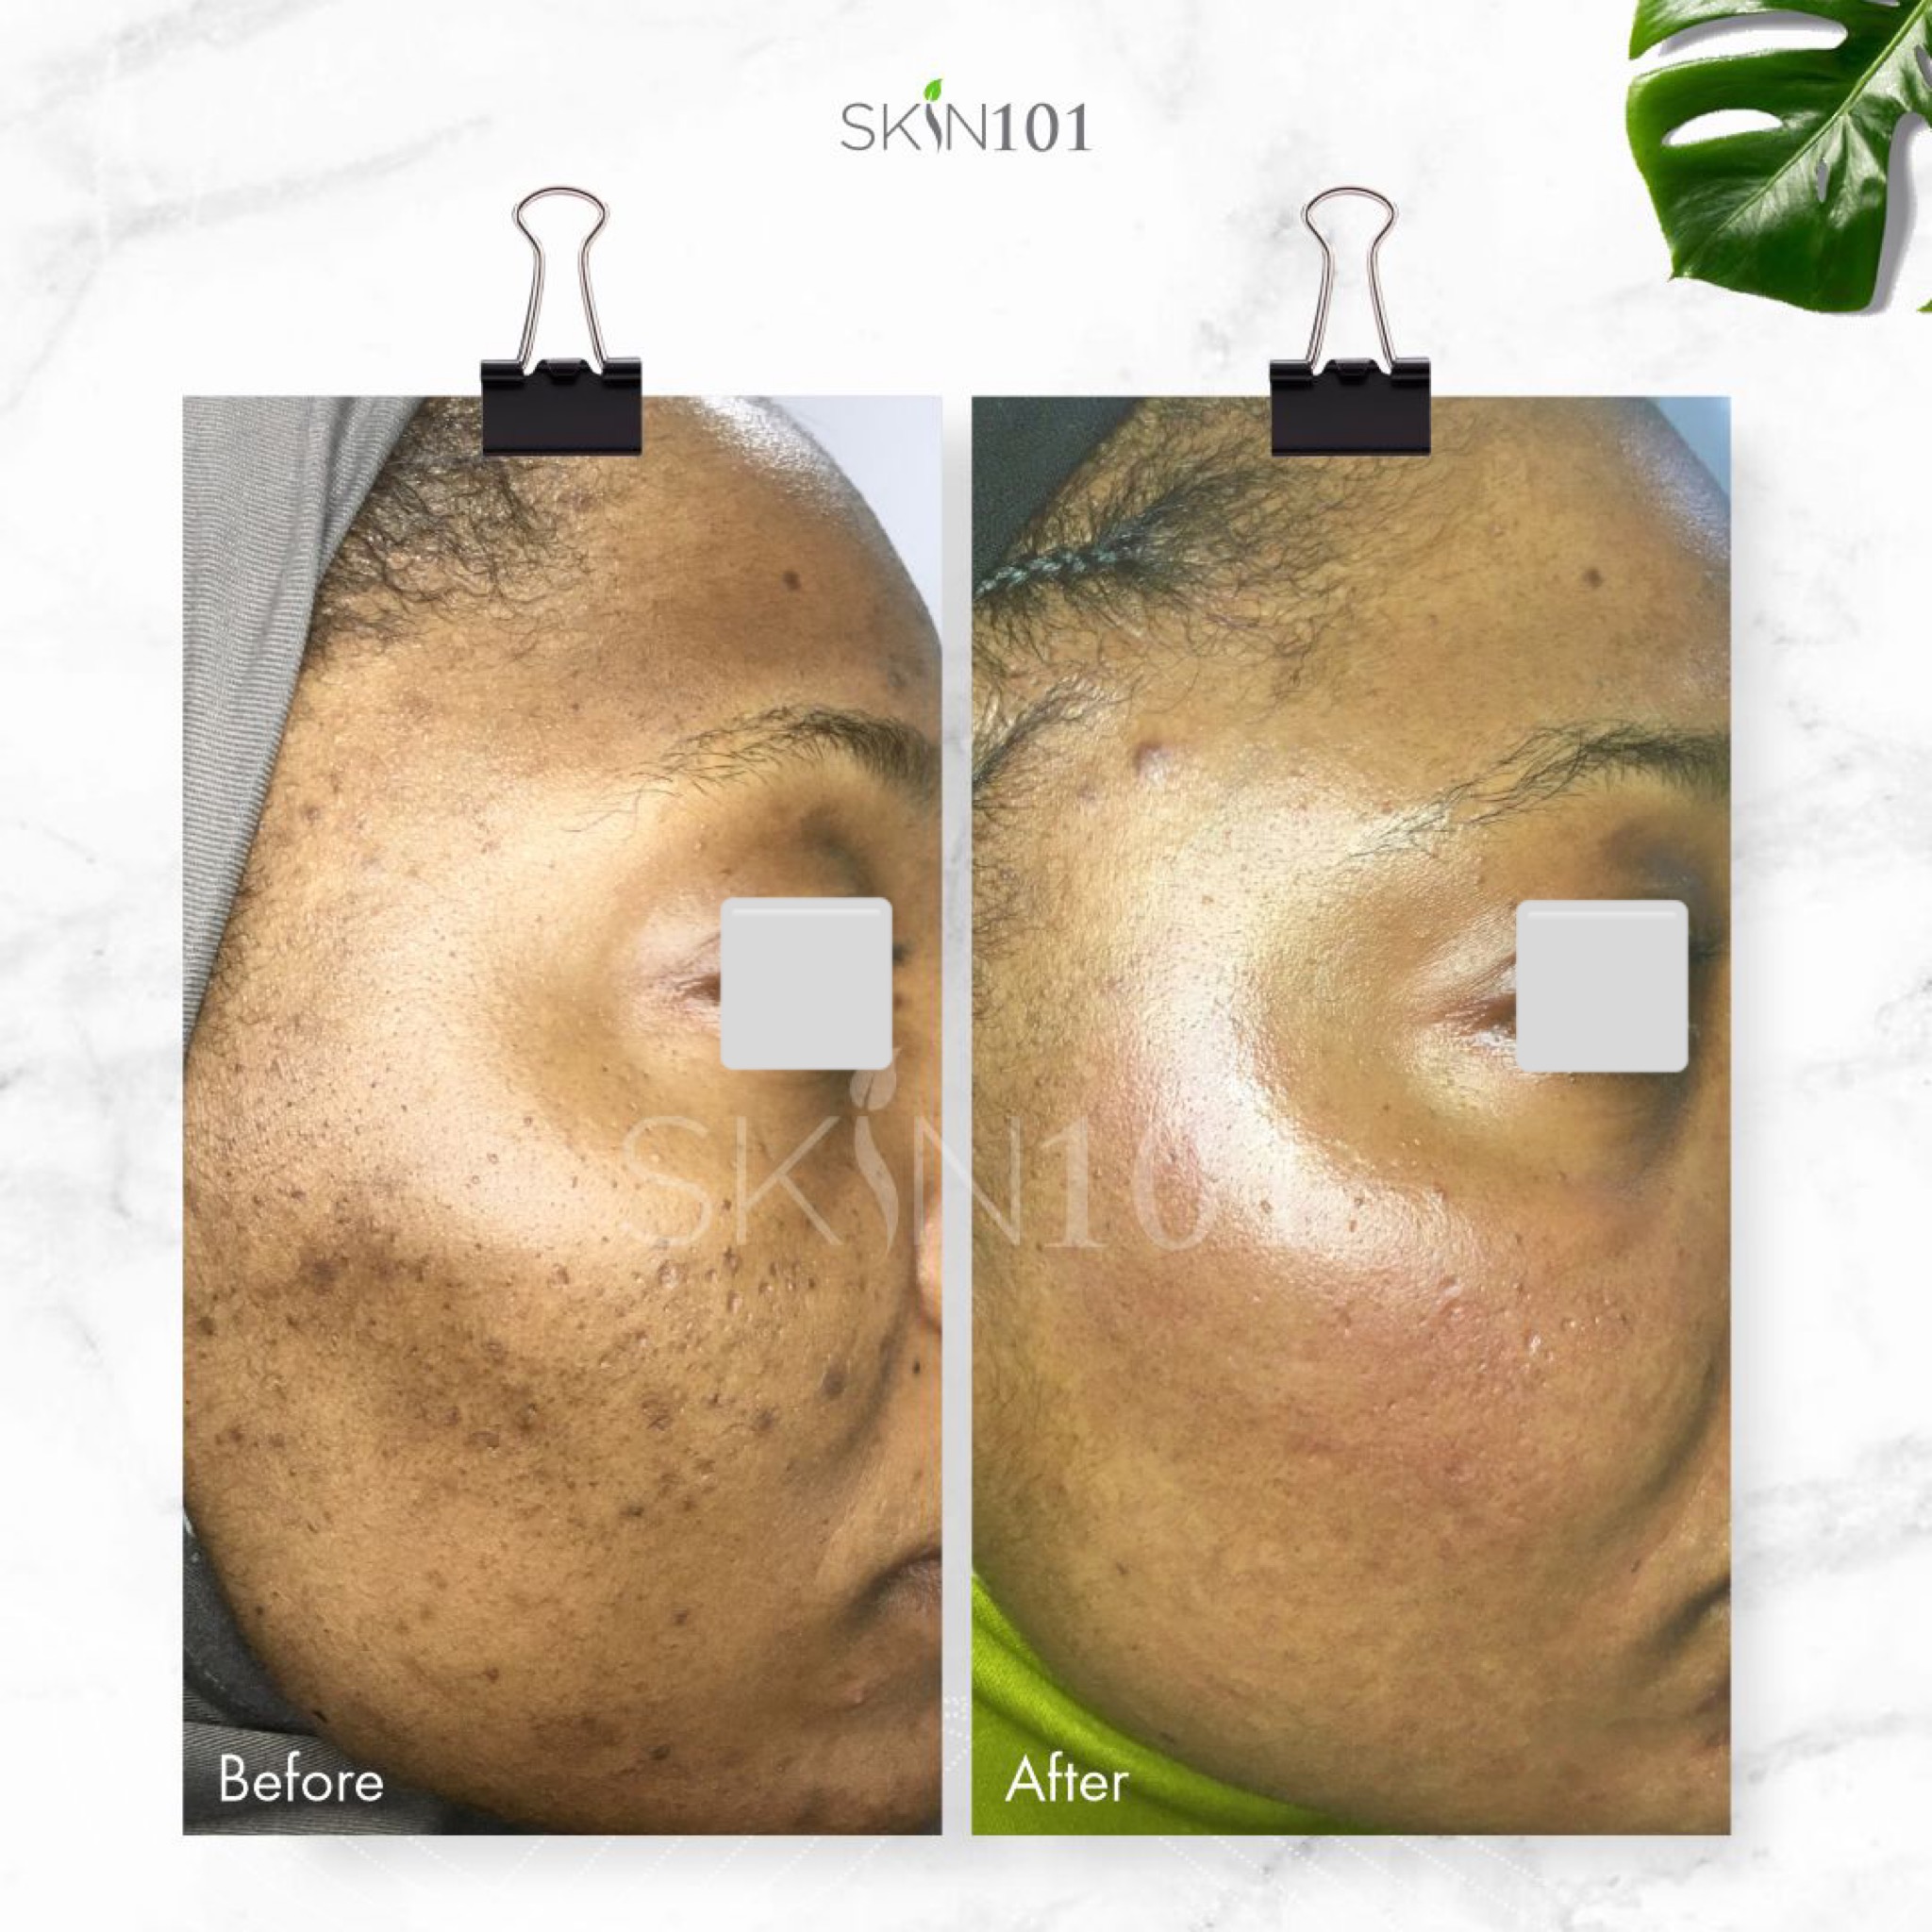 Post Inflammatory Hyperpigmentation PIH From Acne - Before And After